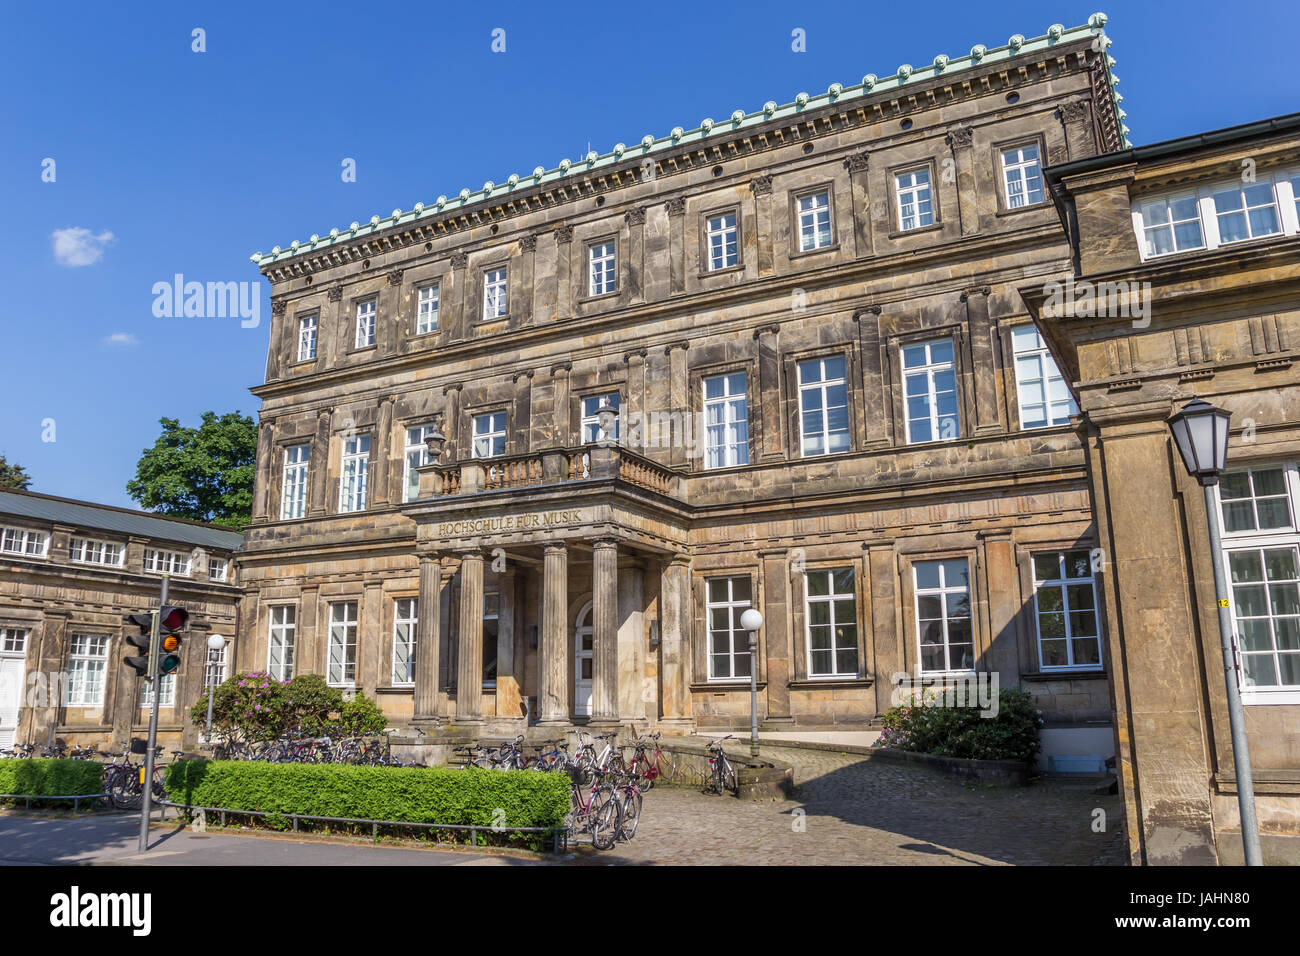 Main building of the music school in Detmold, Germany Stock Photo